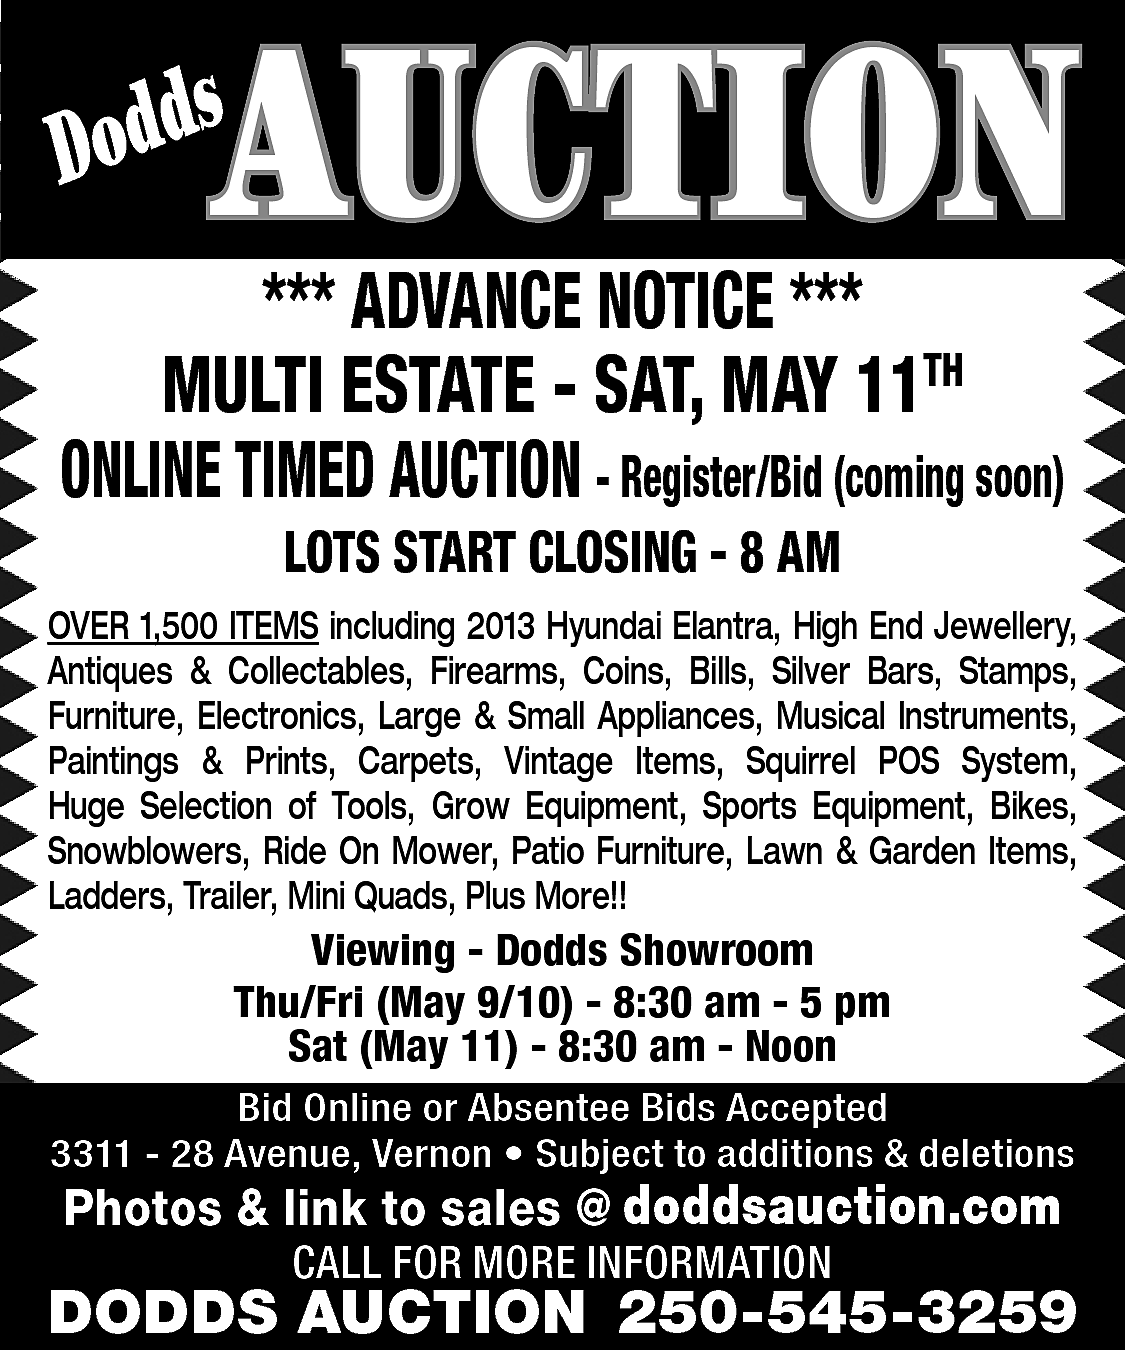 AUCTION <br> <br>s <br>Dodd <br>  AUCTION    s  Dodd    *** ADVANCE NOTICE ***  MULTI ESTATE - SAT, MAY 11TH  ONLINE TIMED AUCTION - Register/Bid (coming soon)  LOTS START CLOSING - 8 AM    OVER 1,500 ITEMS including 2013 Hyundai Elantra, High End Jewellery,  Antiques & Collectables, Firearms, Coins, Bills, Silver Bars, Stamps,  Furniture, Electronics, Large & Small Appliances, Musical Instruments,  Paintings & Prints, Carpets, Vintage Items, Squirrel POS System,  Huge Selection of Tools, Grow Equipment, Sports Equipment, Bikes,  Snowblowers, Ride On Mower, Patio Furniture, Lawn & Garden Items,  Ladders, Trailer, Mini Quads, Plus More!!    Viewing - Dodds Showroom  Thu/Fri (May 9/10) - 8:30 am - 5 pm  Sat (May 11) - 8:30 am - Noon  Bid Online or Absentee Bids Accepted  3311 - 28 Avenue, Vernon • Subject to additions & deletions    www.doddsauction.com  Photos & link to sales @  doddsauction.com  CALL FOR MORE INFORMATION    DODDS AUCTION 250-545-3259    